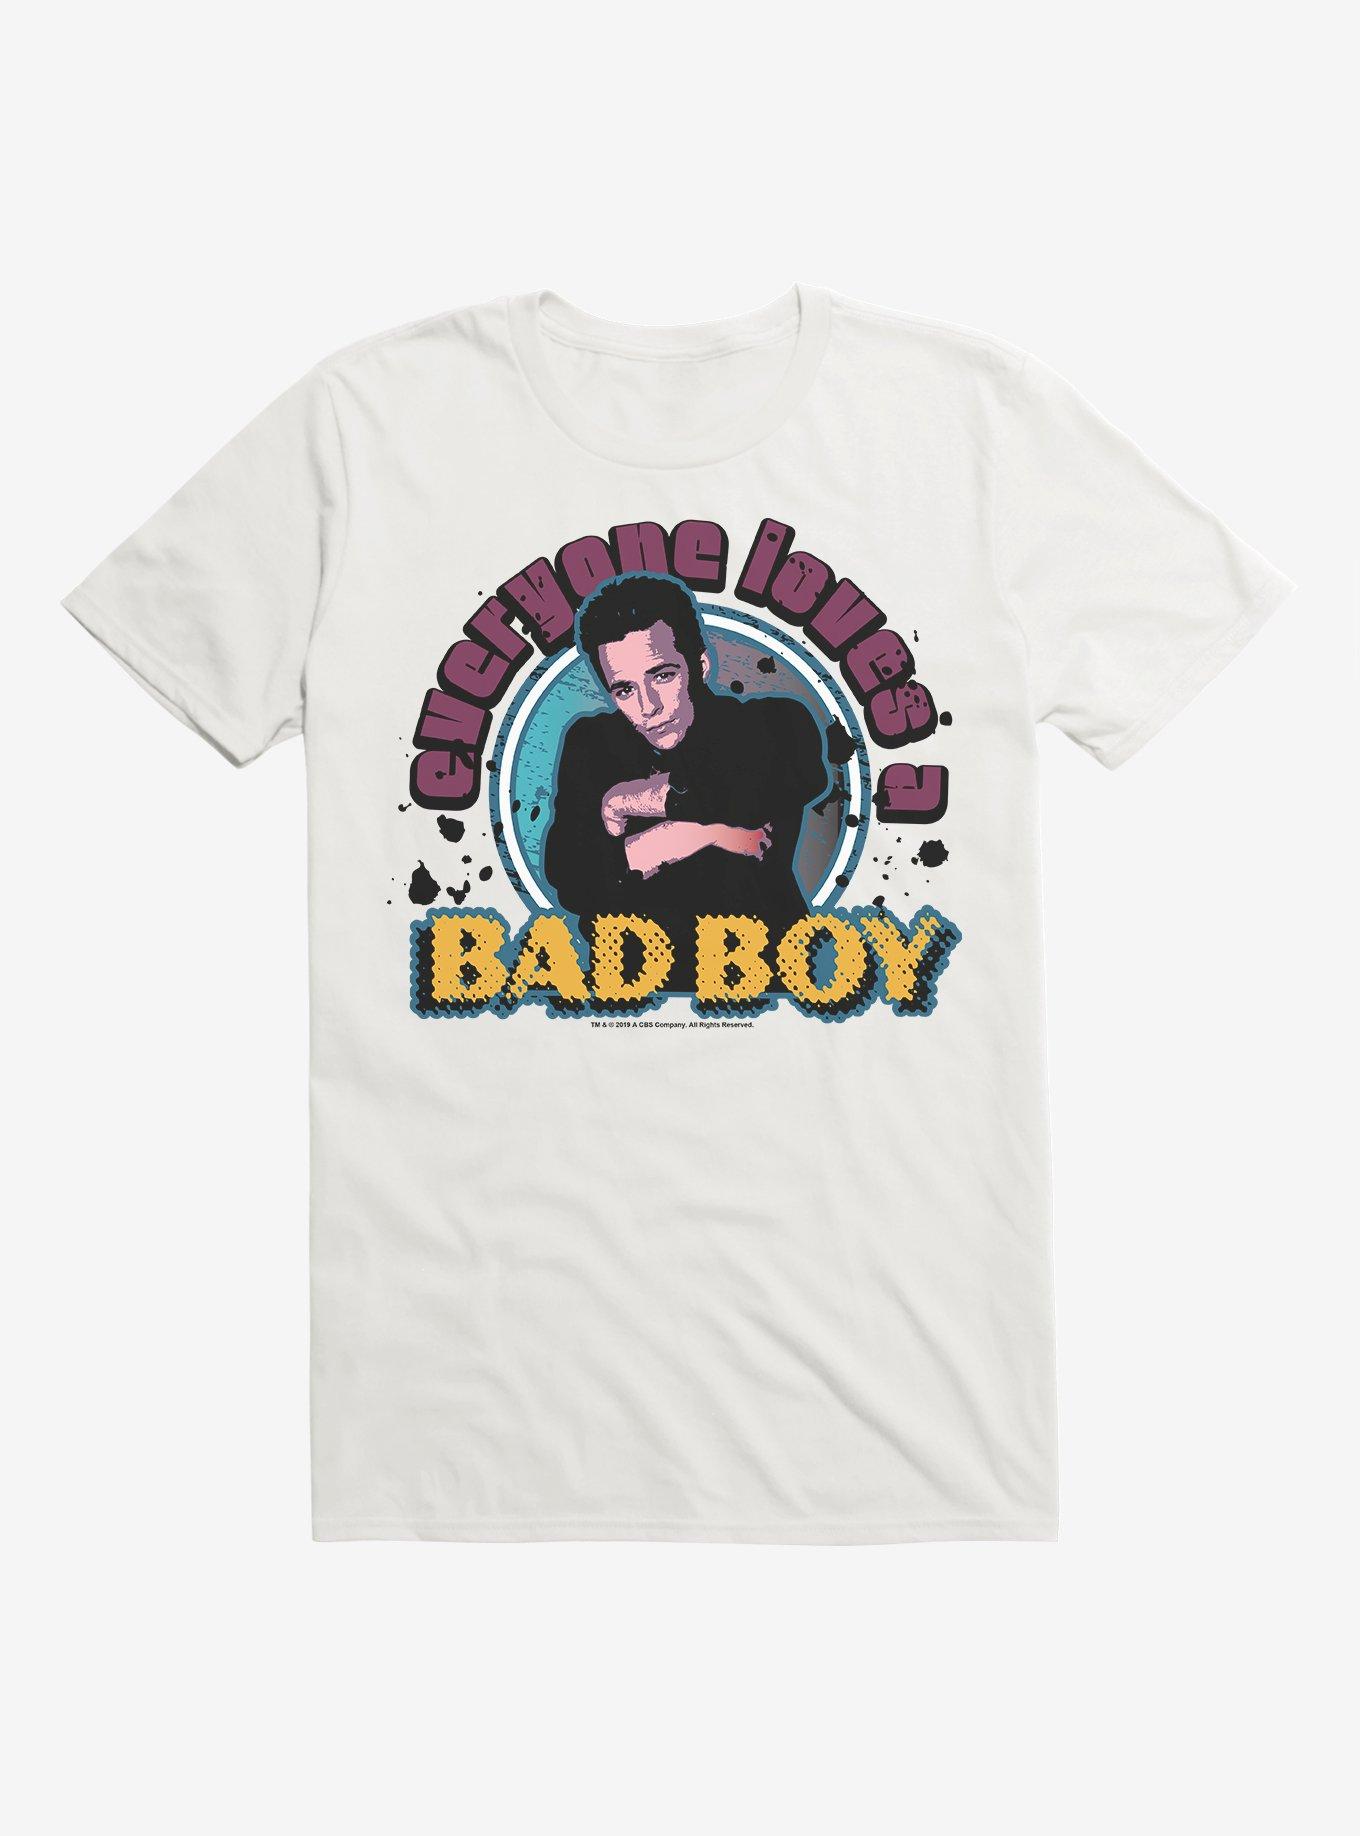 Beverly Hills 90210 Everyone Loves A Bad Boy T-Shirt, WHITE, hi-res